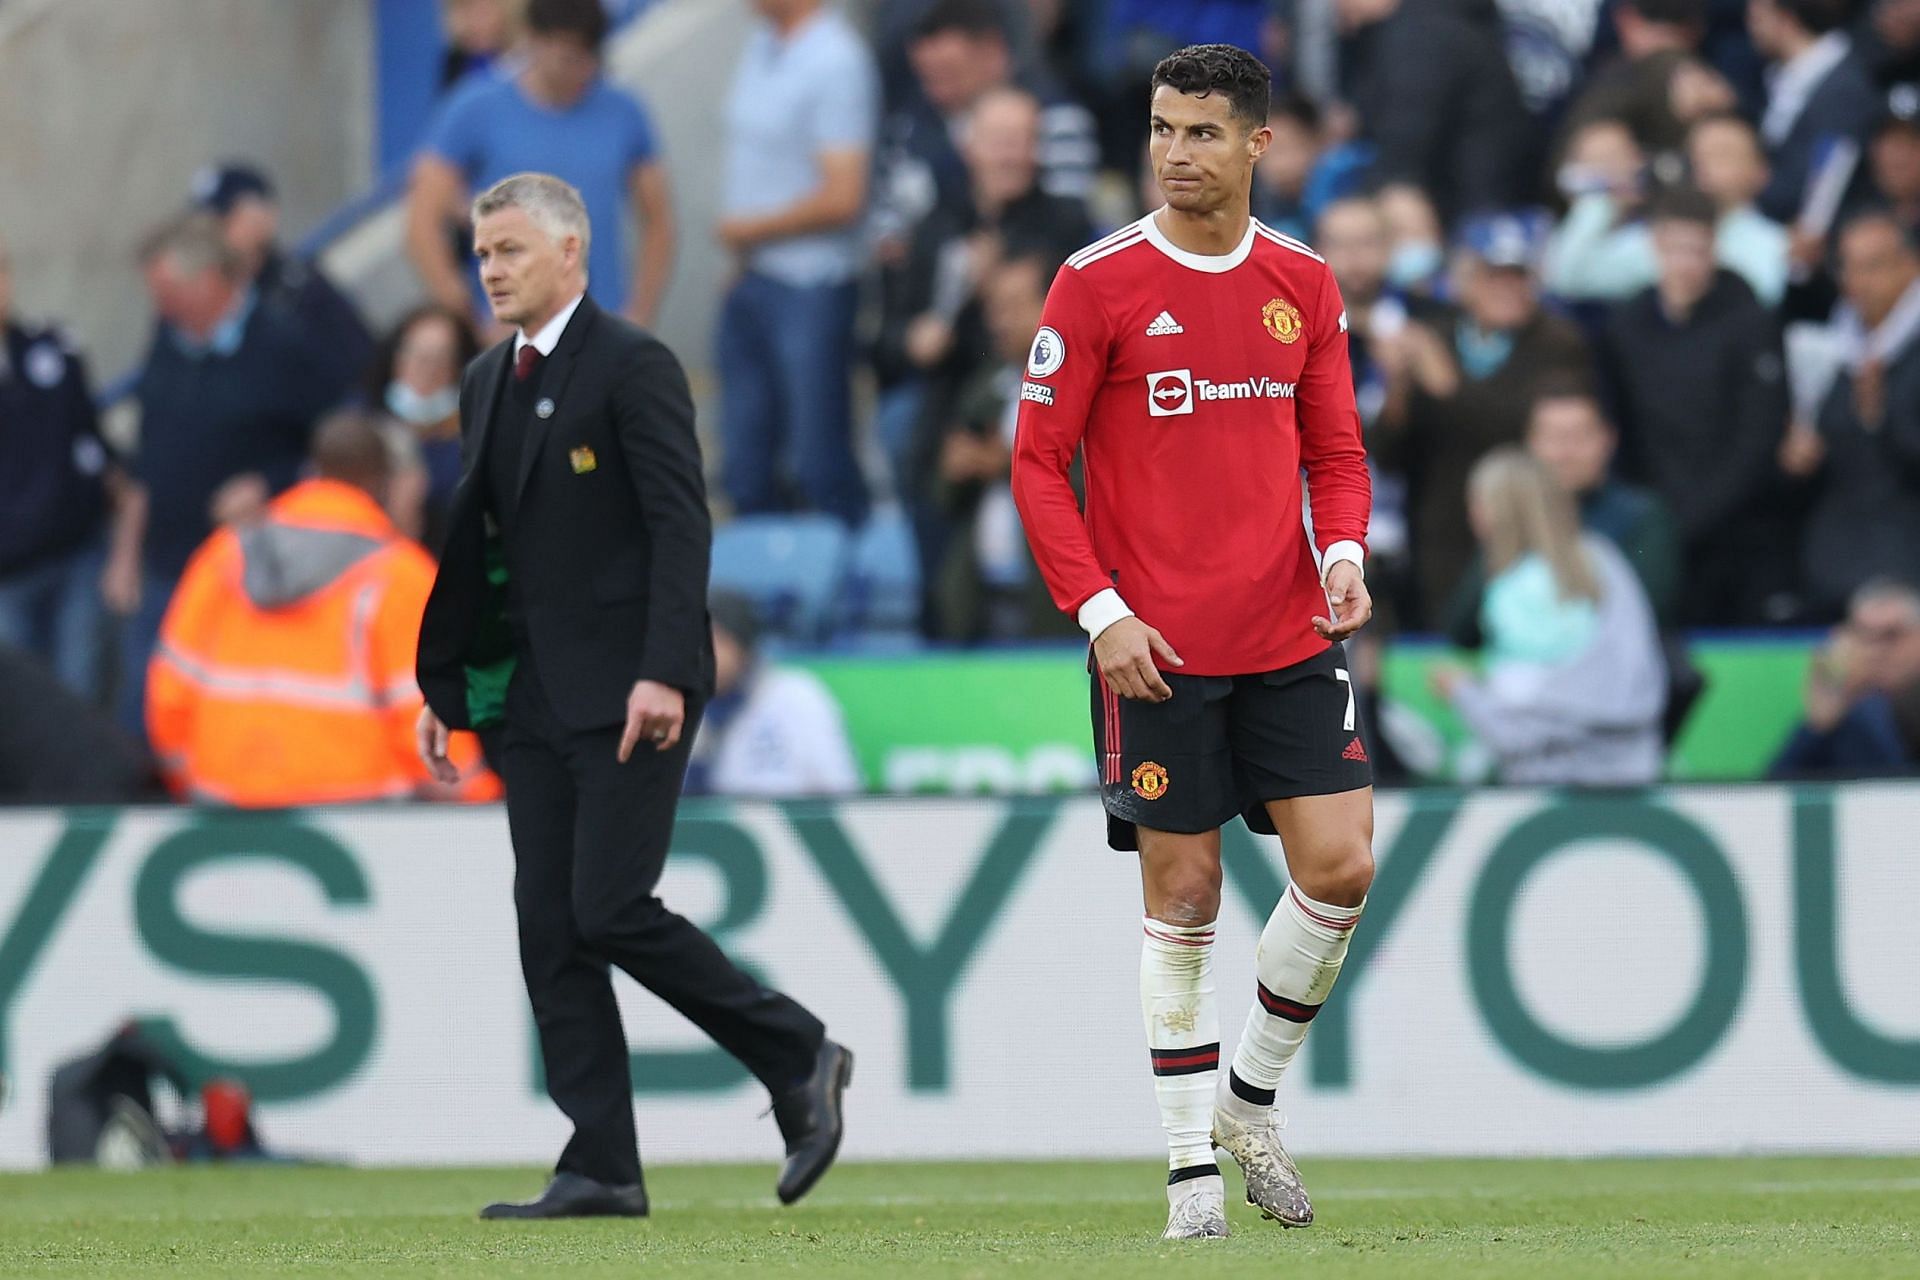 Cristiano Ronaldo wanted Luis Enrique to succeed Solskjaer at Manchester United.